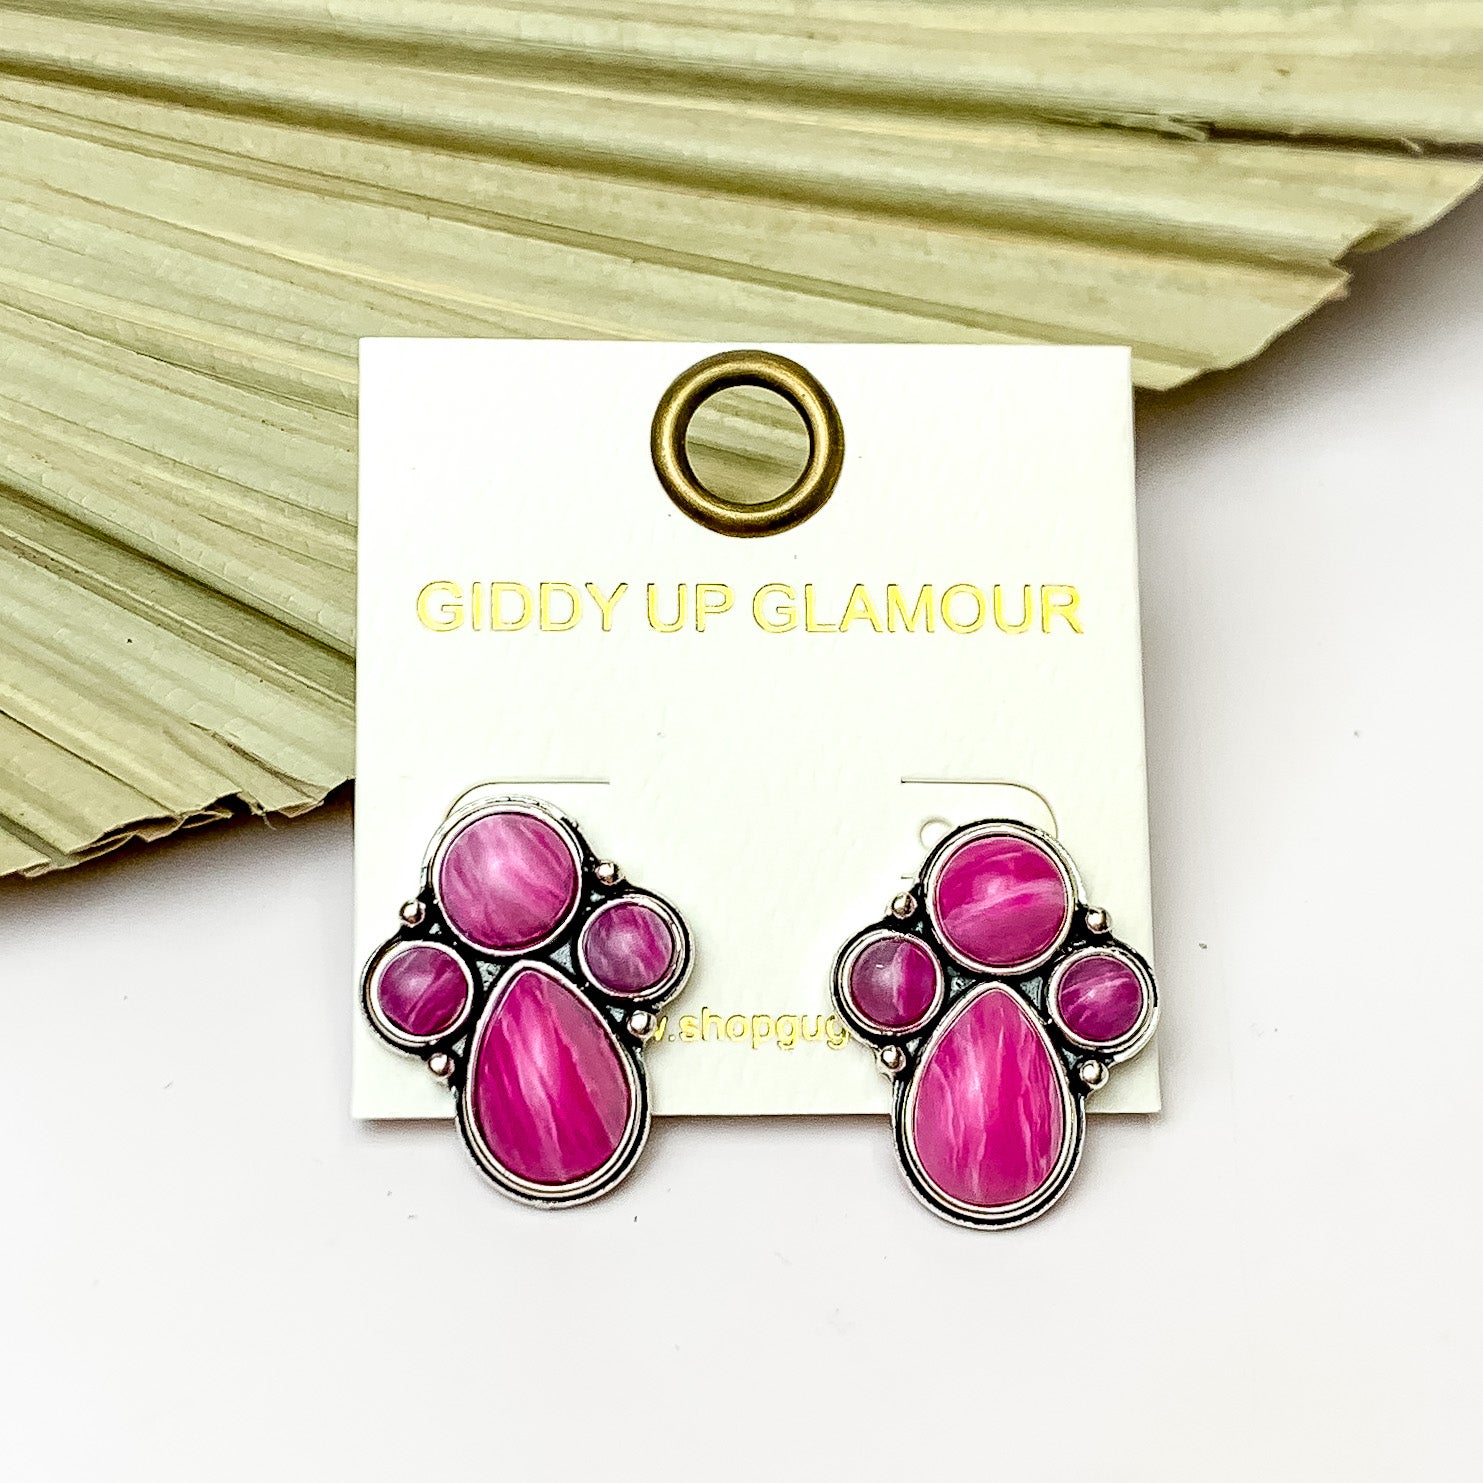 Silver Tone Cluster Stone Earrings in Light Pink. Pictured on a white background with a fan leaf behind the earrings.